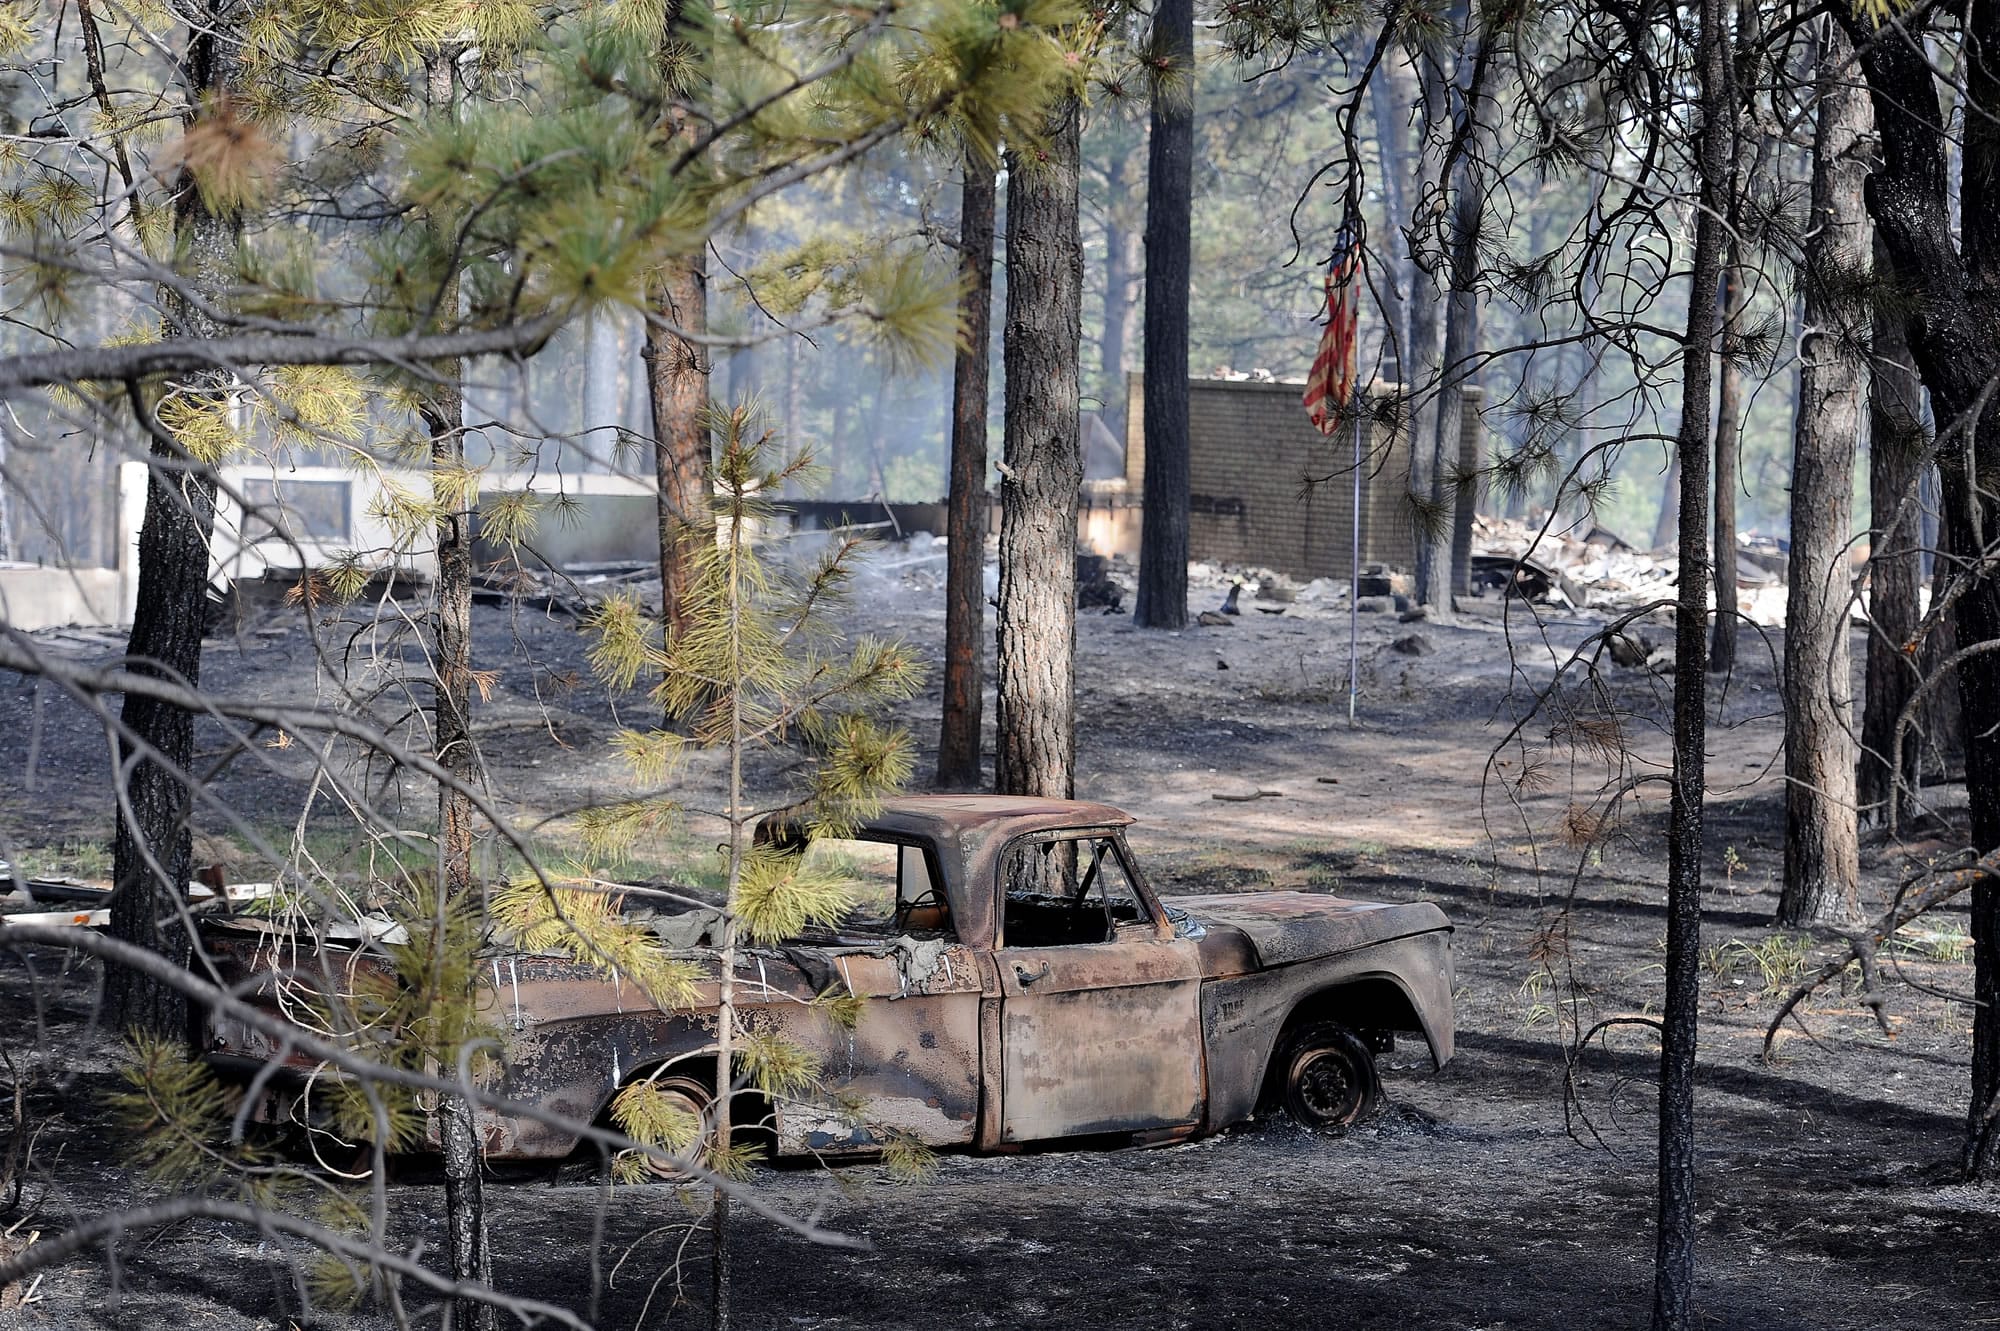 Blackened and charred homes are left along Herring Road in the Black Forest area northeast of Colorado Springs, Colo., on Wednesday.